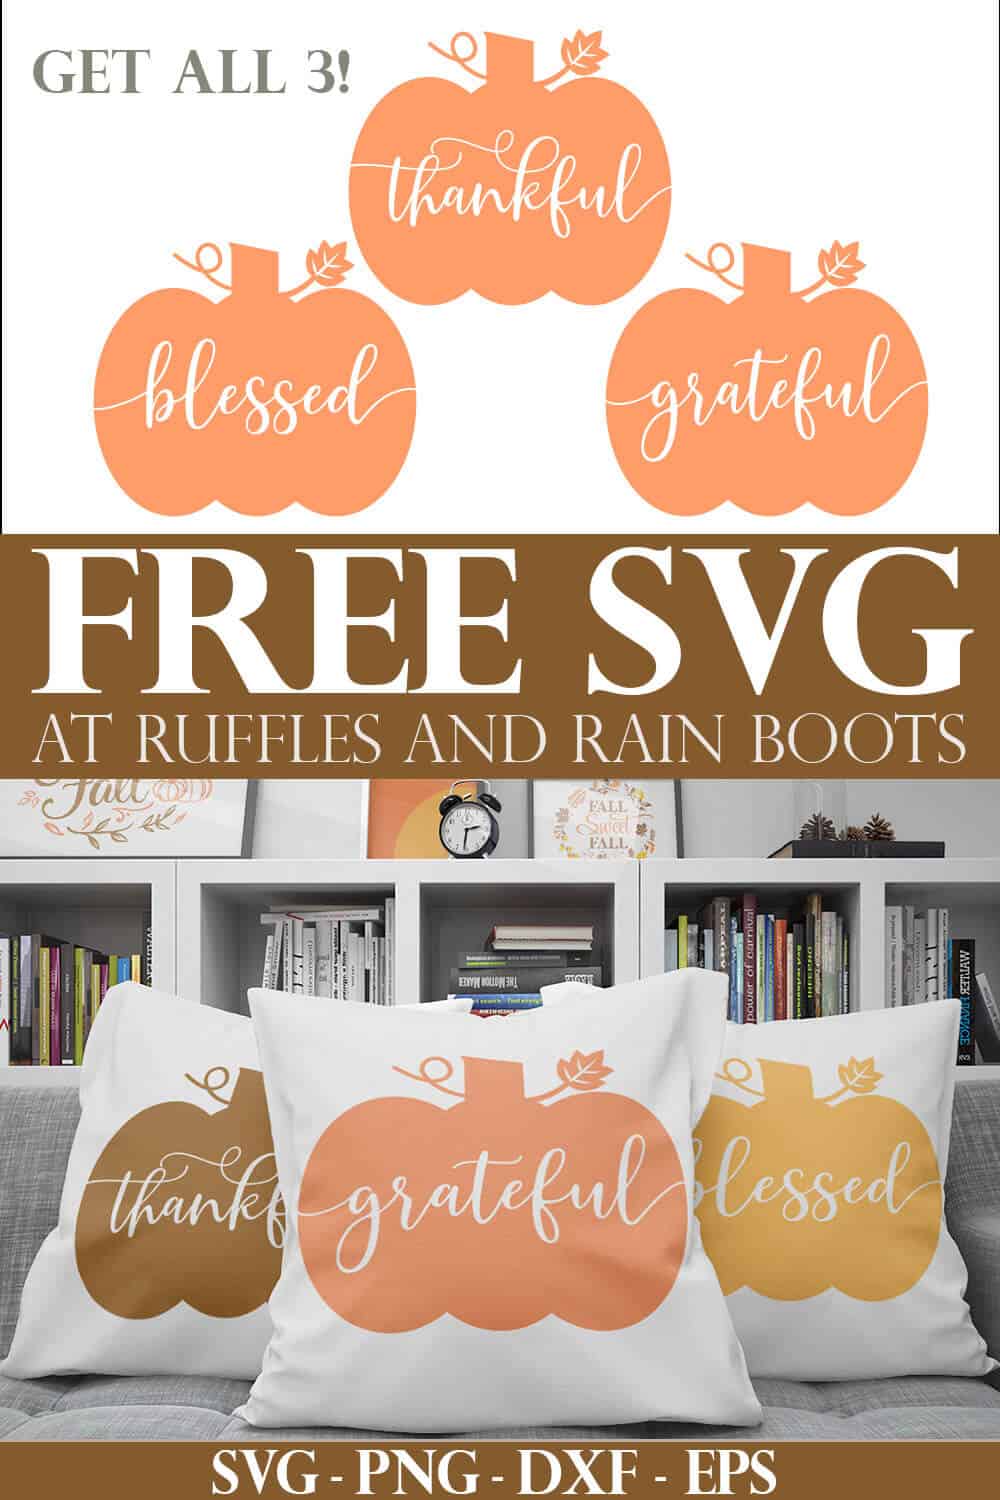 Photo collage of Free Pumpkin SVG files for Cricut thankful grateful blessed hand lettered with text which reads free svg.